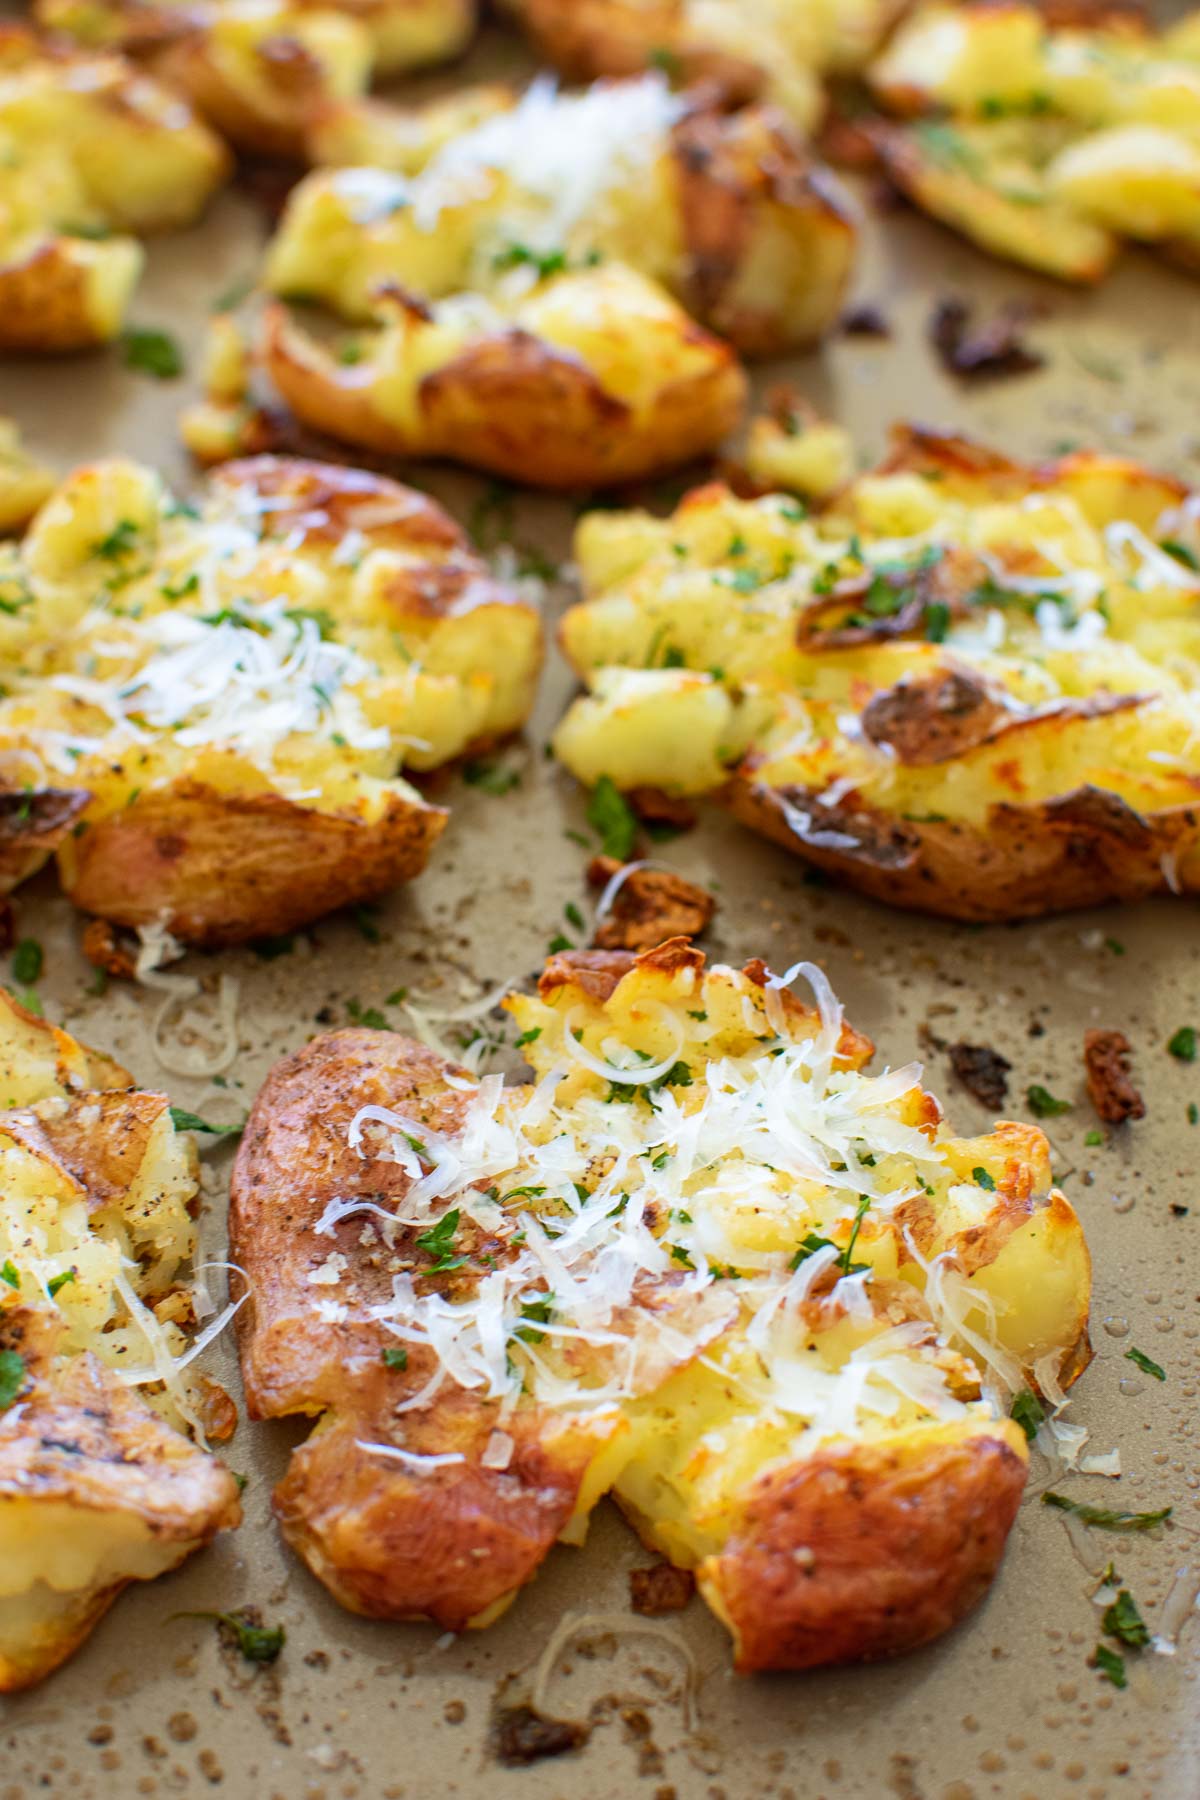 A sheet pan with smashed and baked red potatoes topped with cheese and herbs.